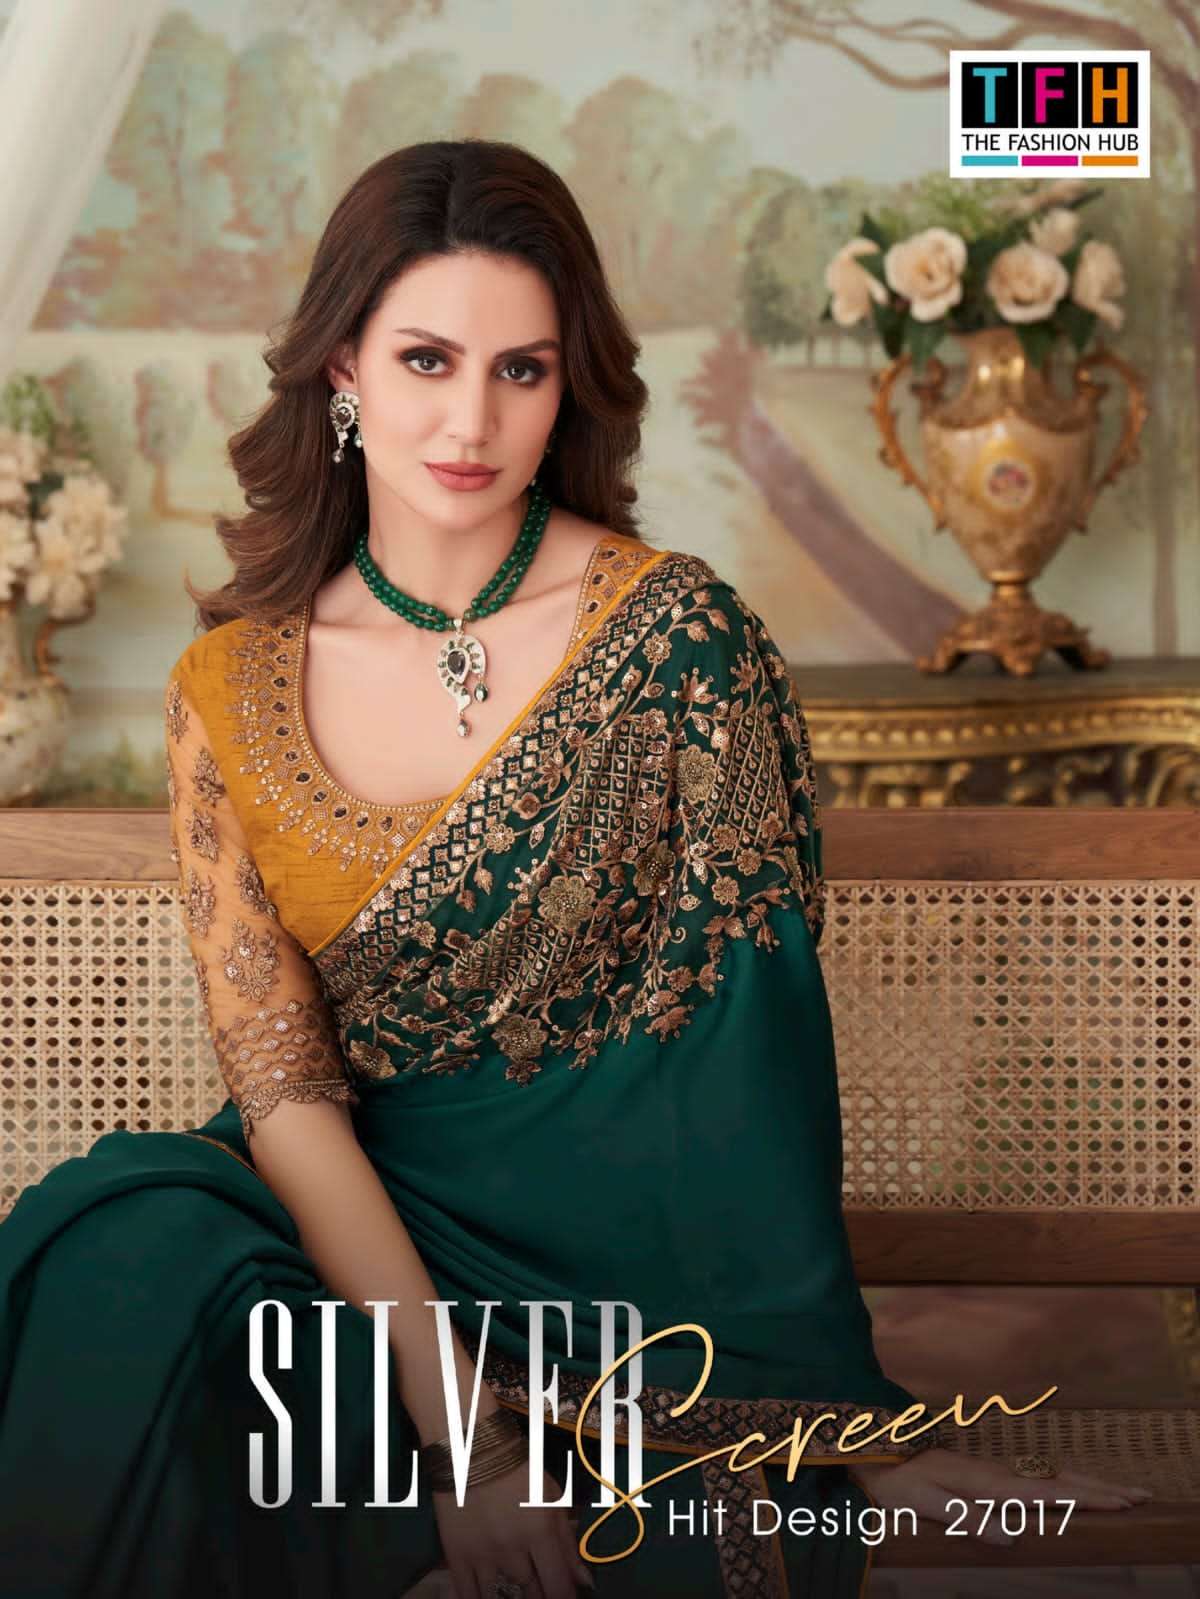 TFH Silver Screen Hit Design 27017 Colors Party Wear Saree Collection